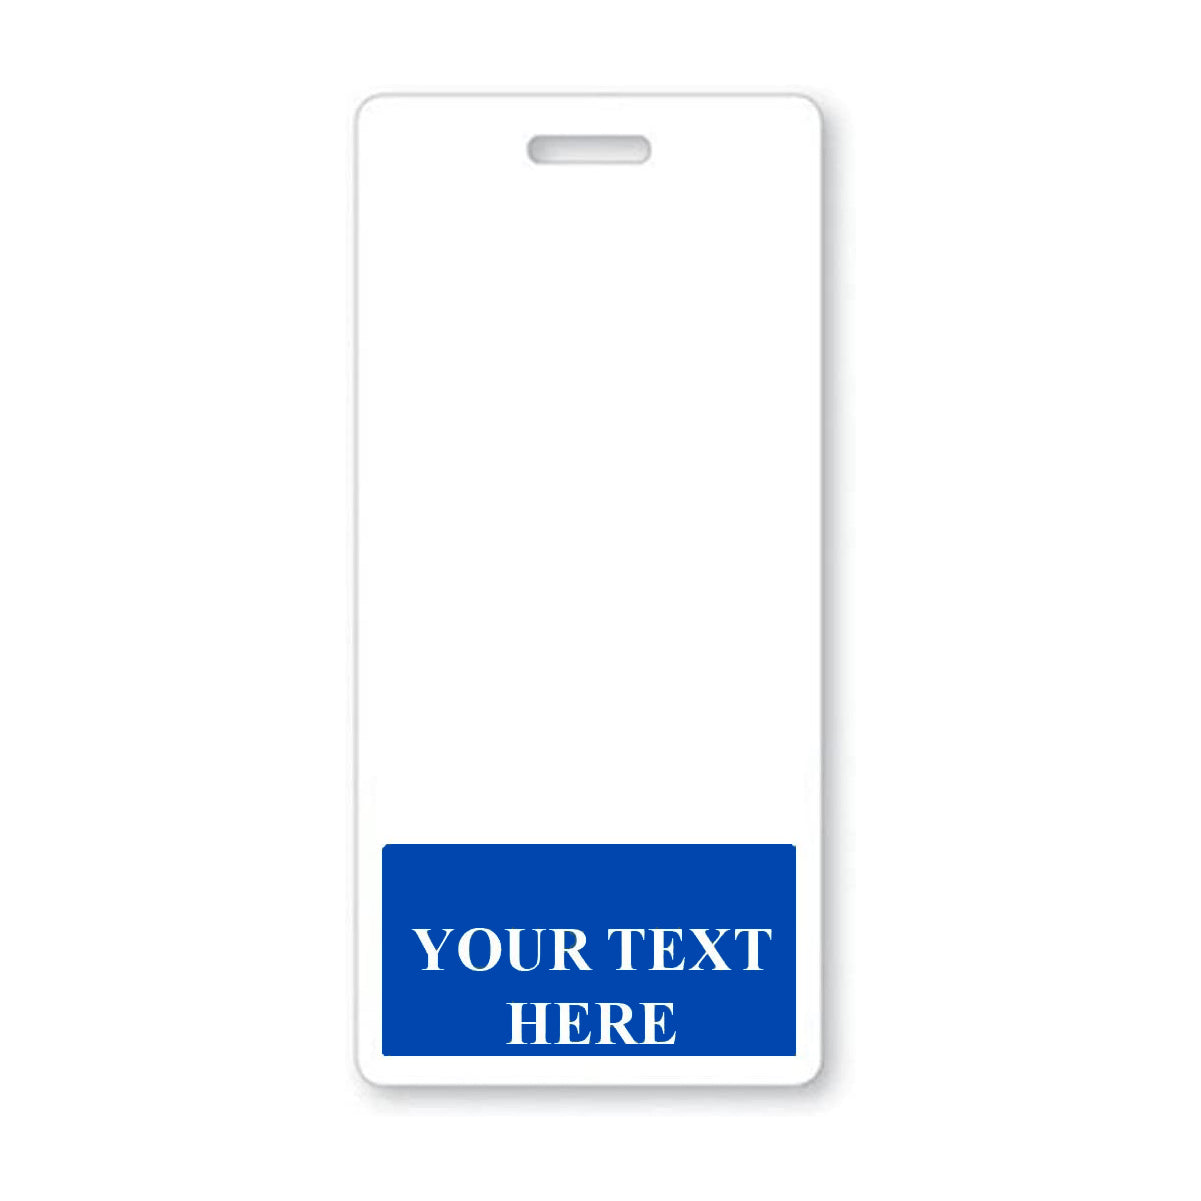 A Custom Printed Badge Buddy Vertical (Standard Size) white badge with a blue section at the bottom where you can insert custom text, ideal for identification badges or custom badge buddies.